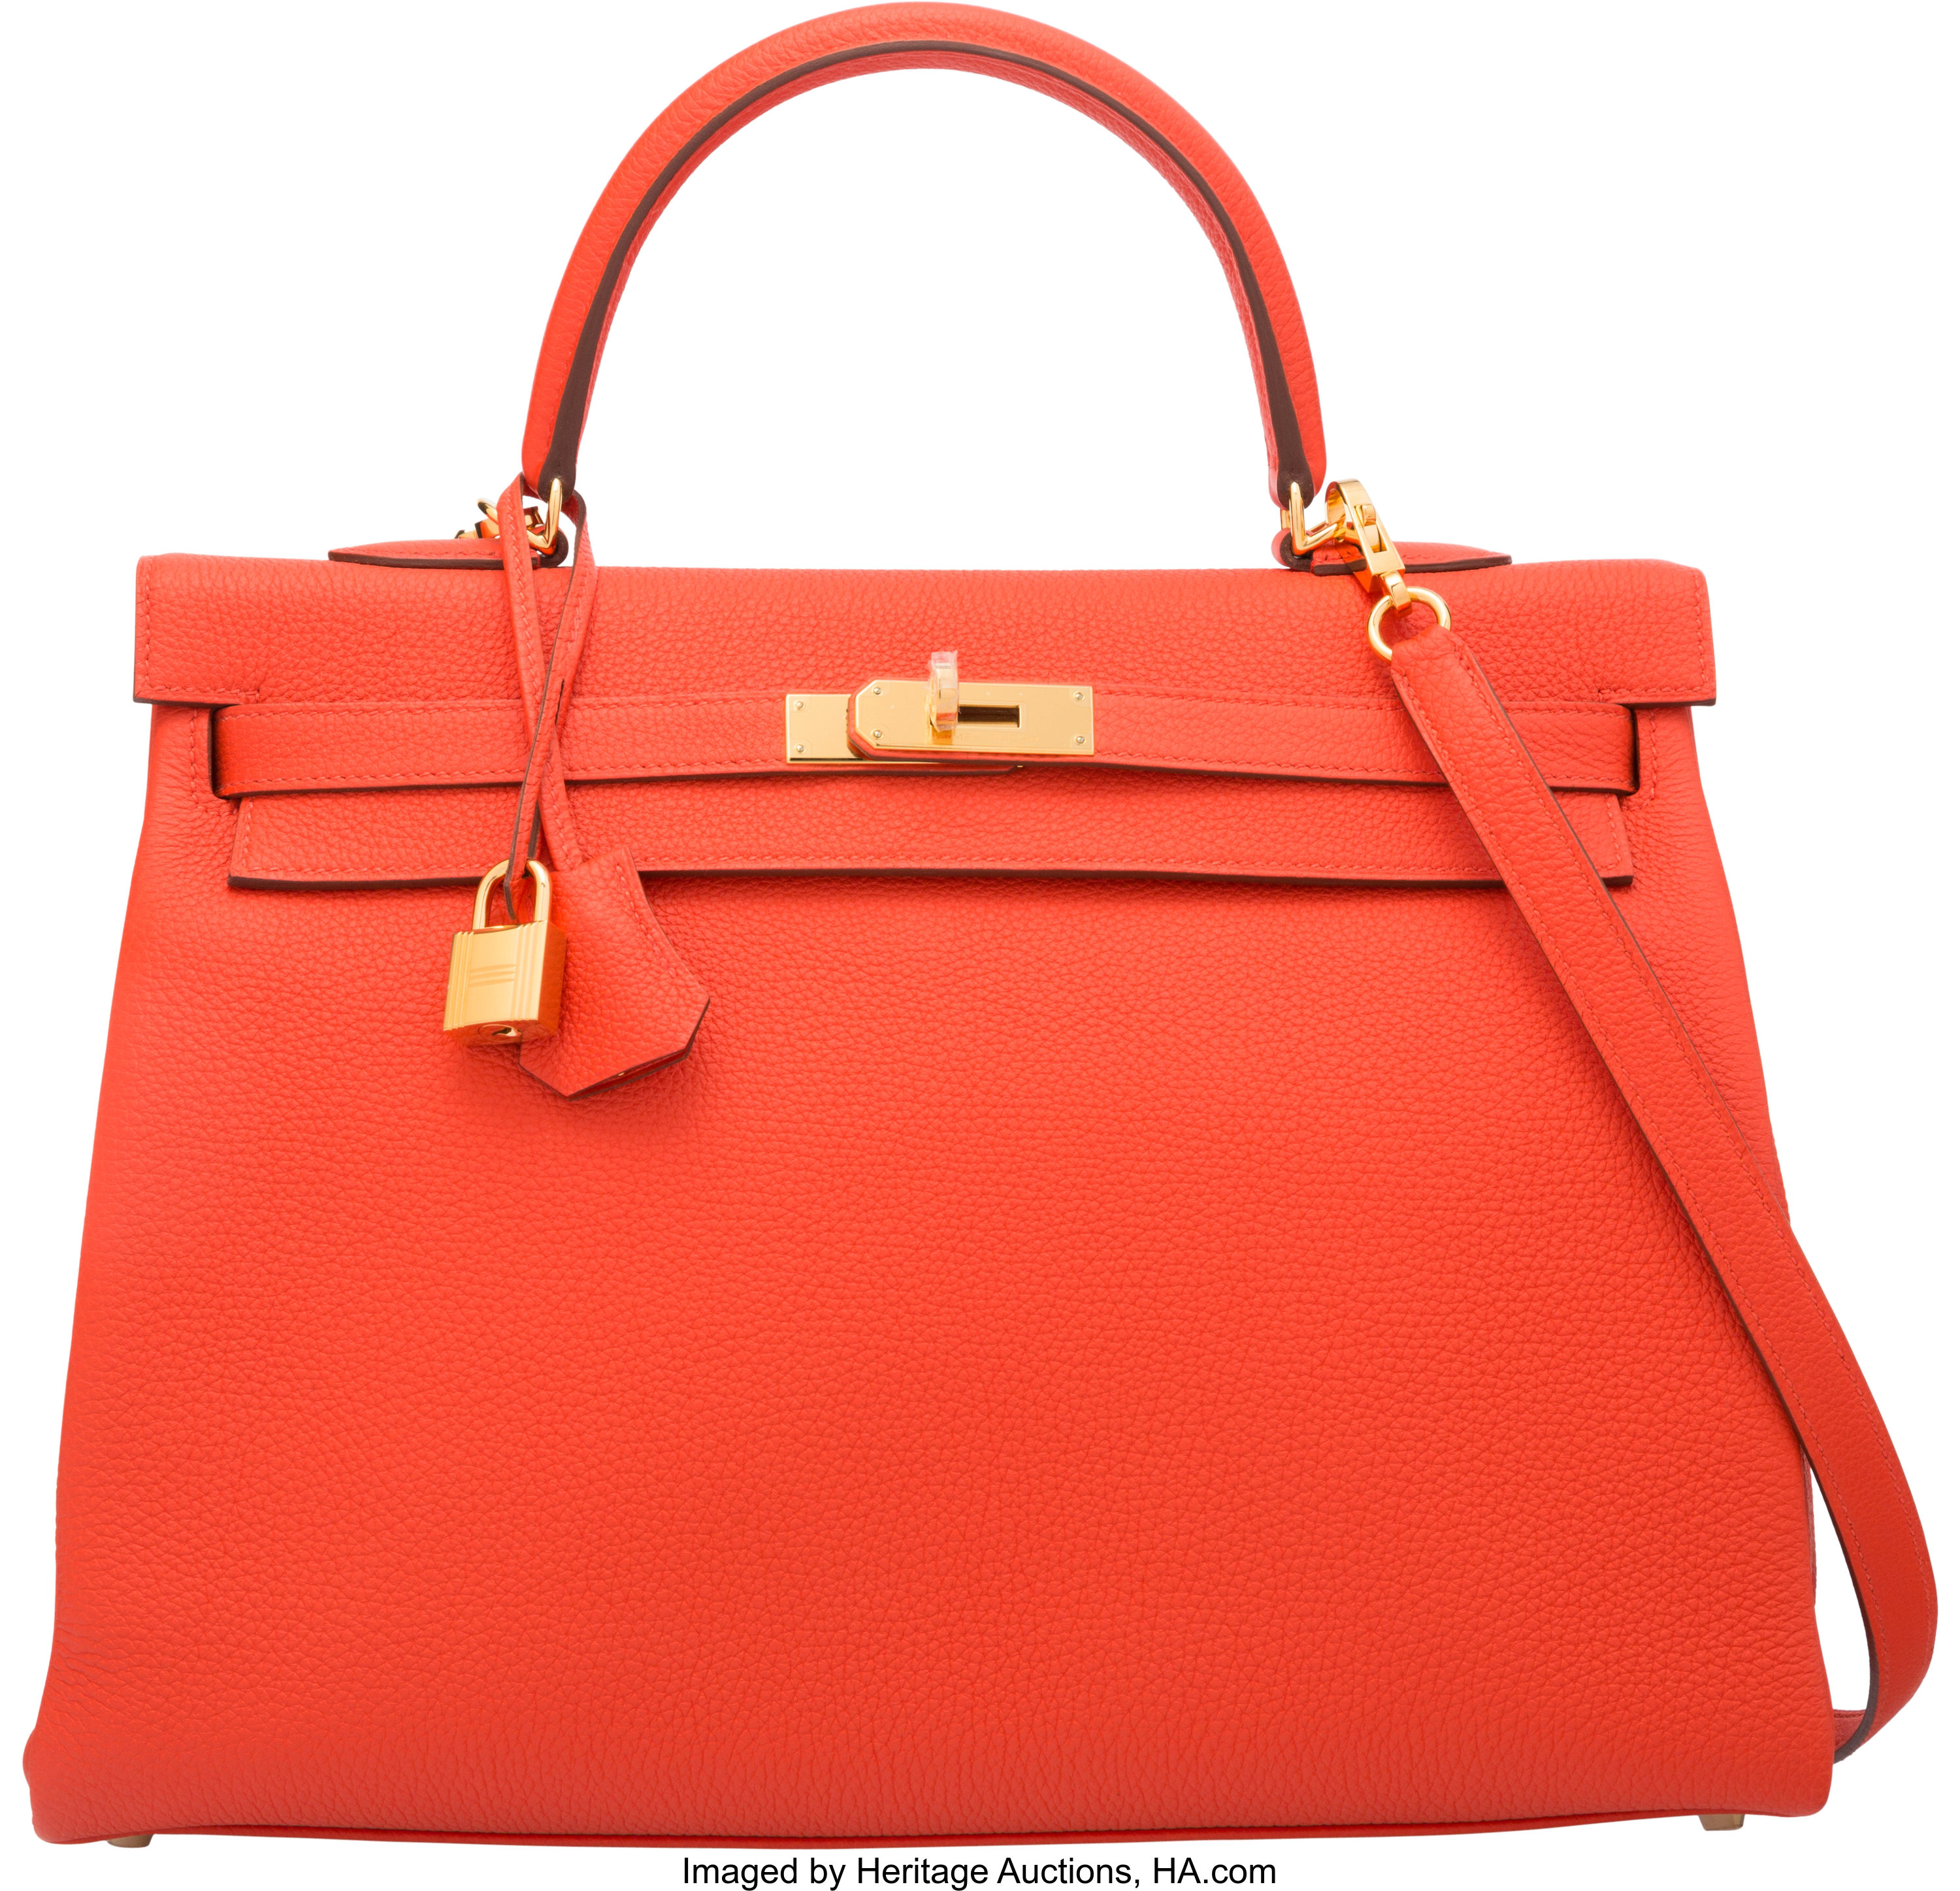 Hermes 35cm Capucine Clemence Leather Retourne Kelly Bag with Gold ...